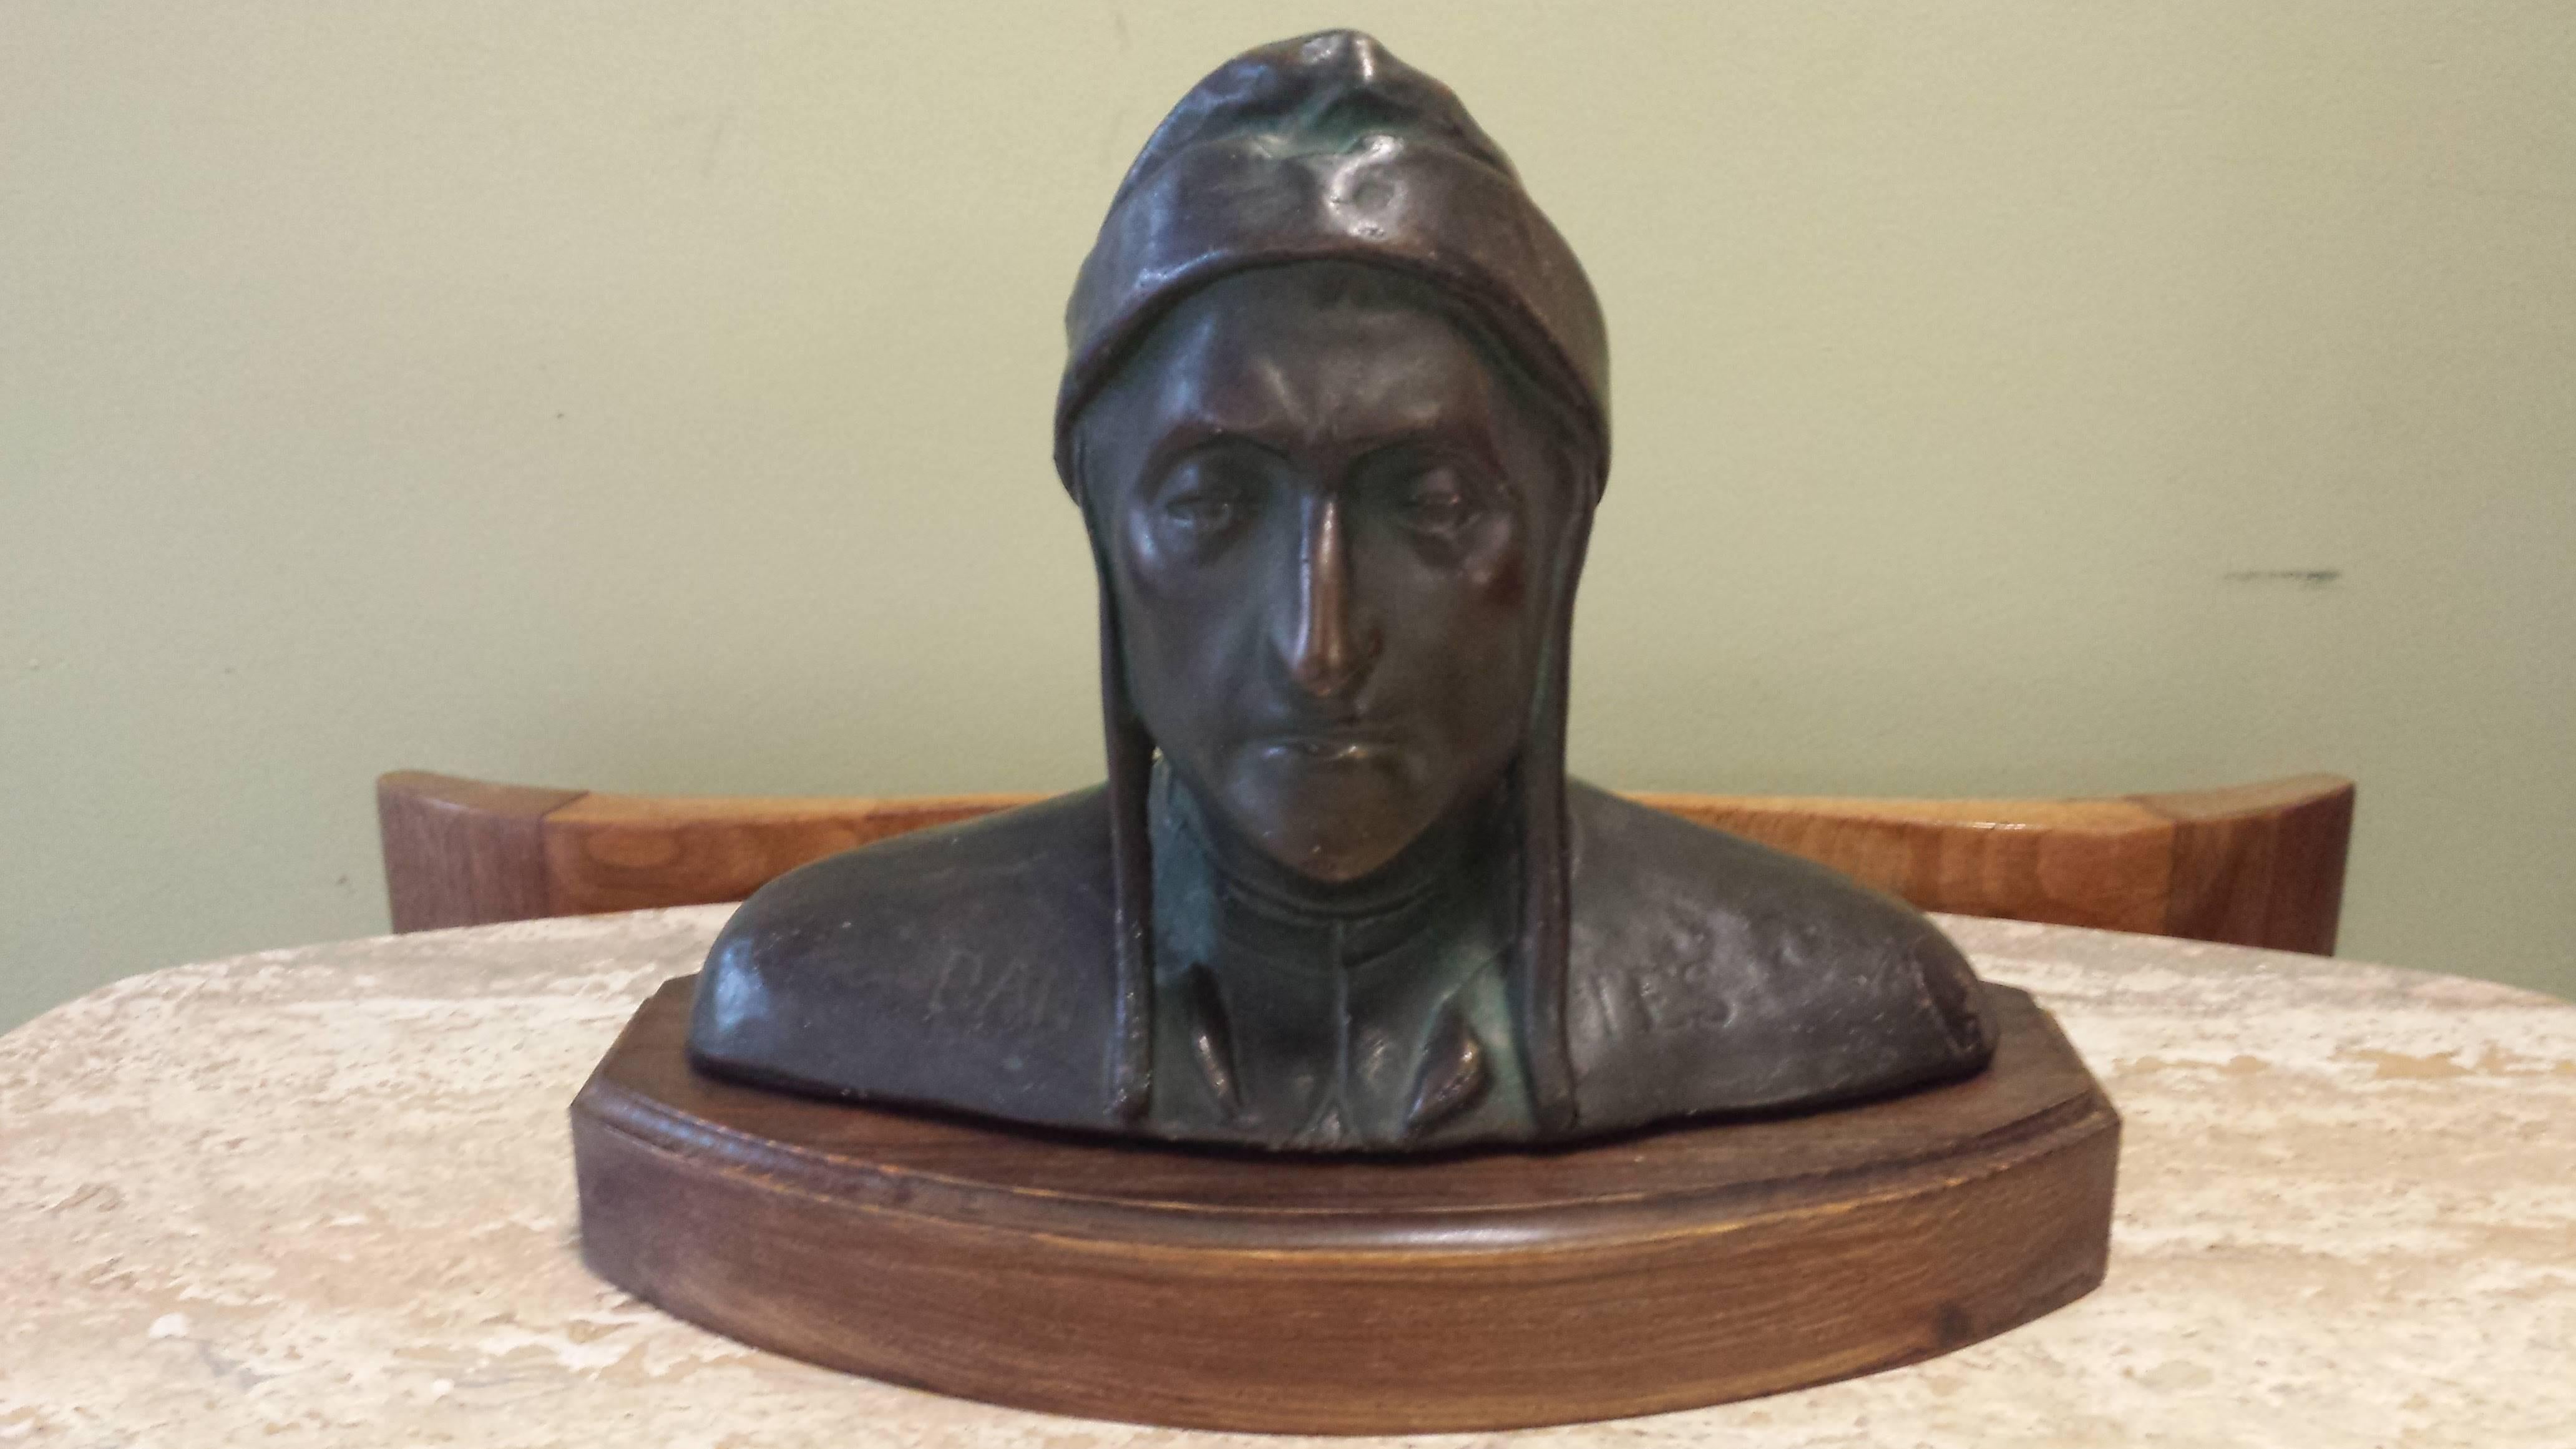 Bronzed plaster portrait bust of Dantes Alighieri, circa 1890-1900, made in Italy, mounted on a wood stand, measuring 7